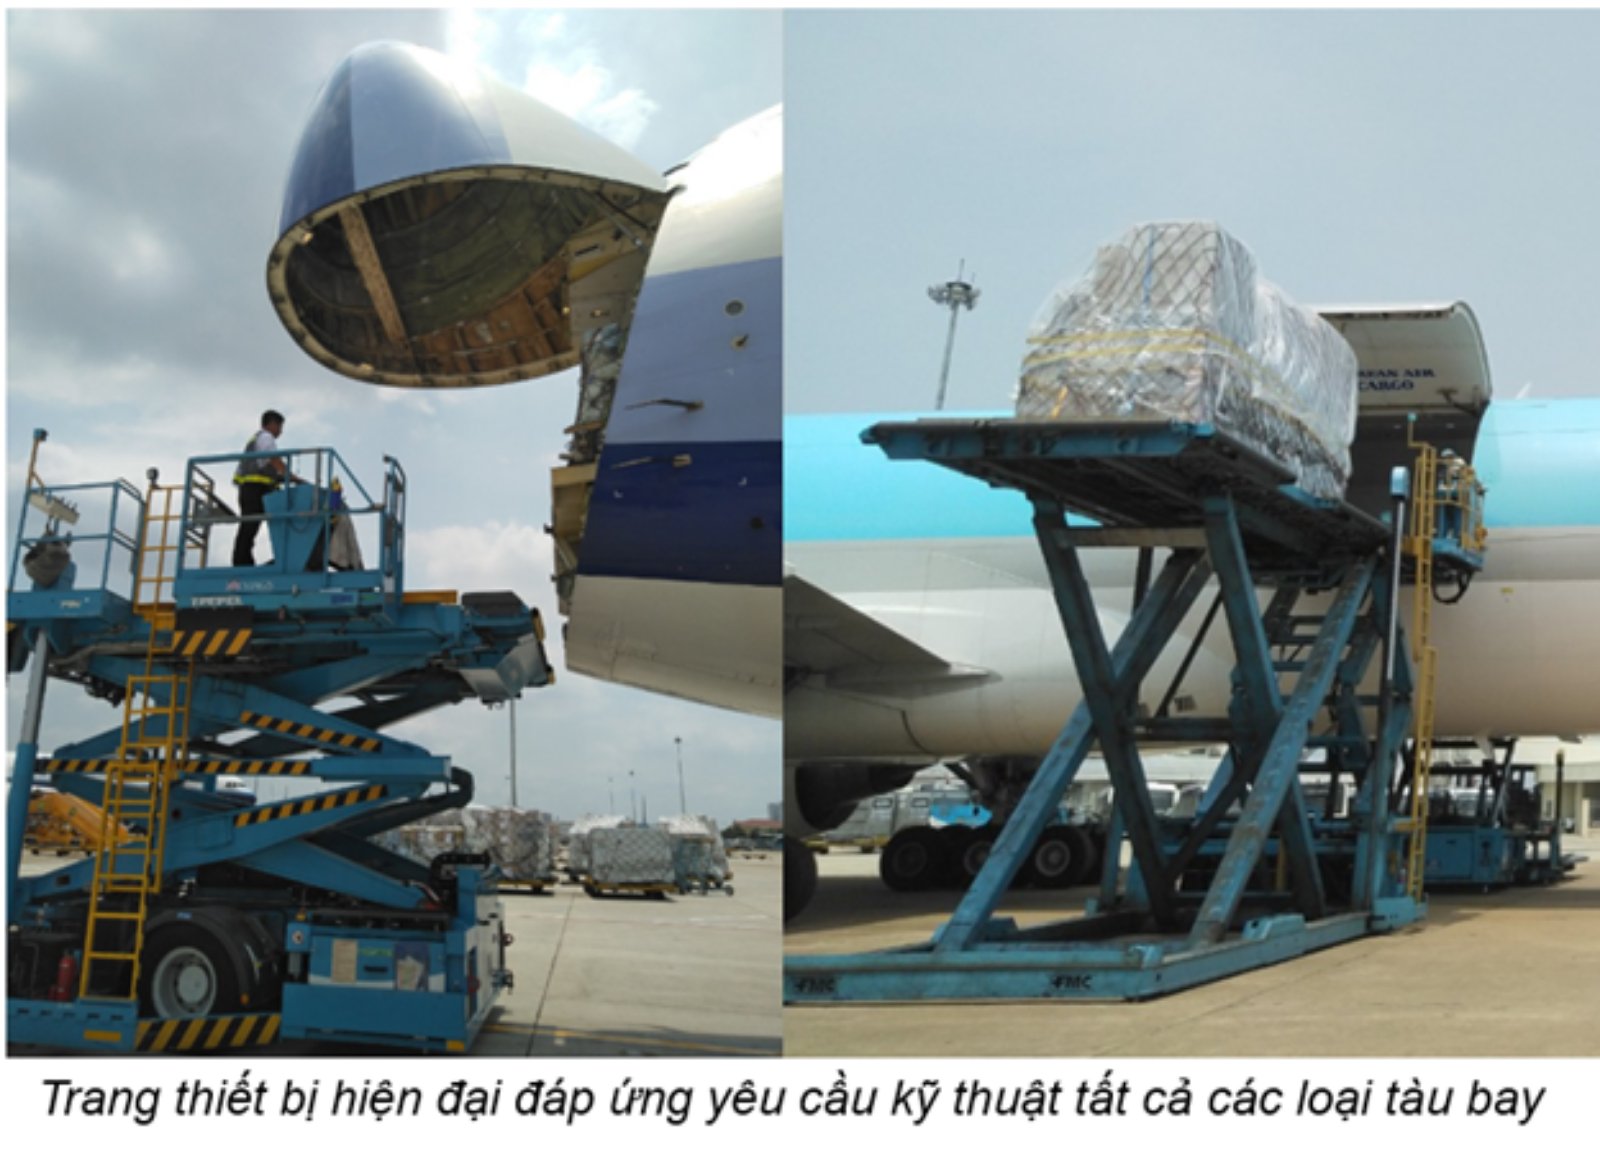 VIAGS TAN SON NHAT STRENGHTHENED SERVICE WORK FOR CARGO FLIGHTS